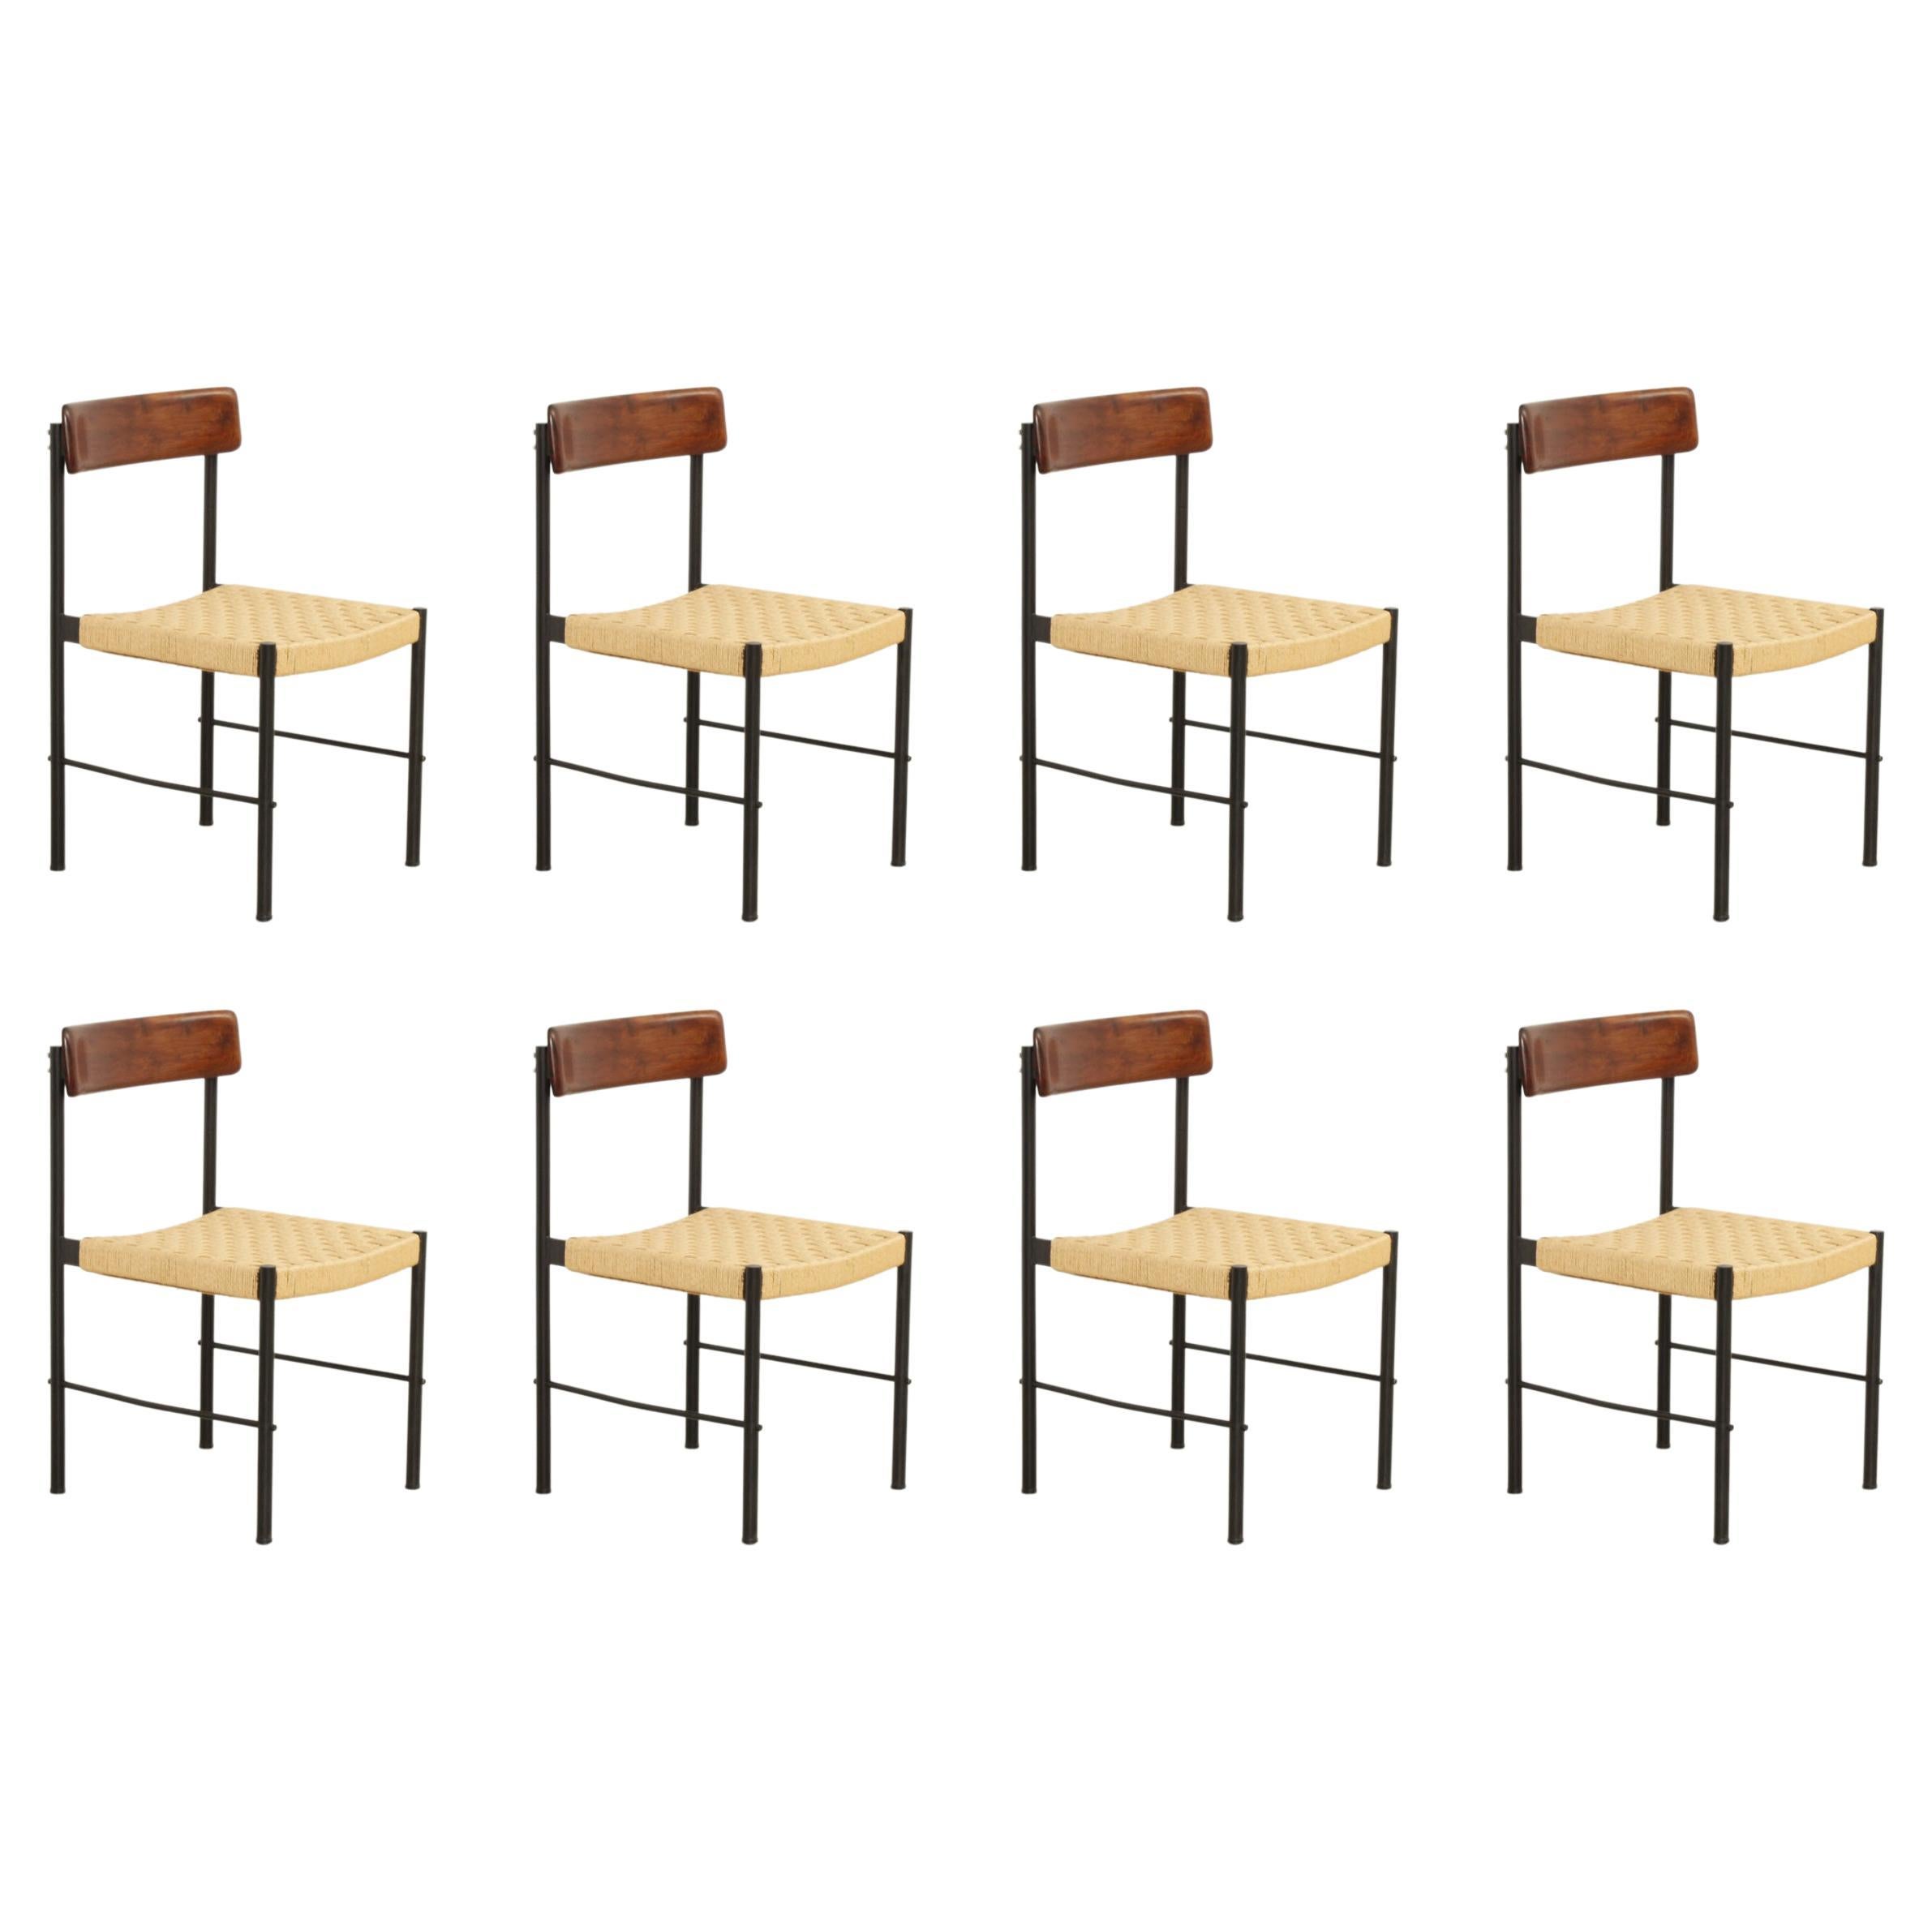 Set of Eight Chairs with Rope Seats by Casas, Spain, 1961